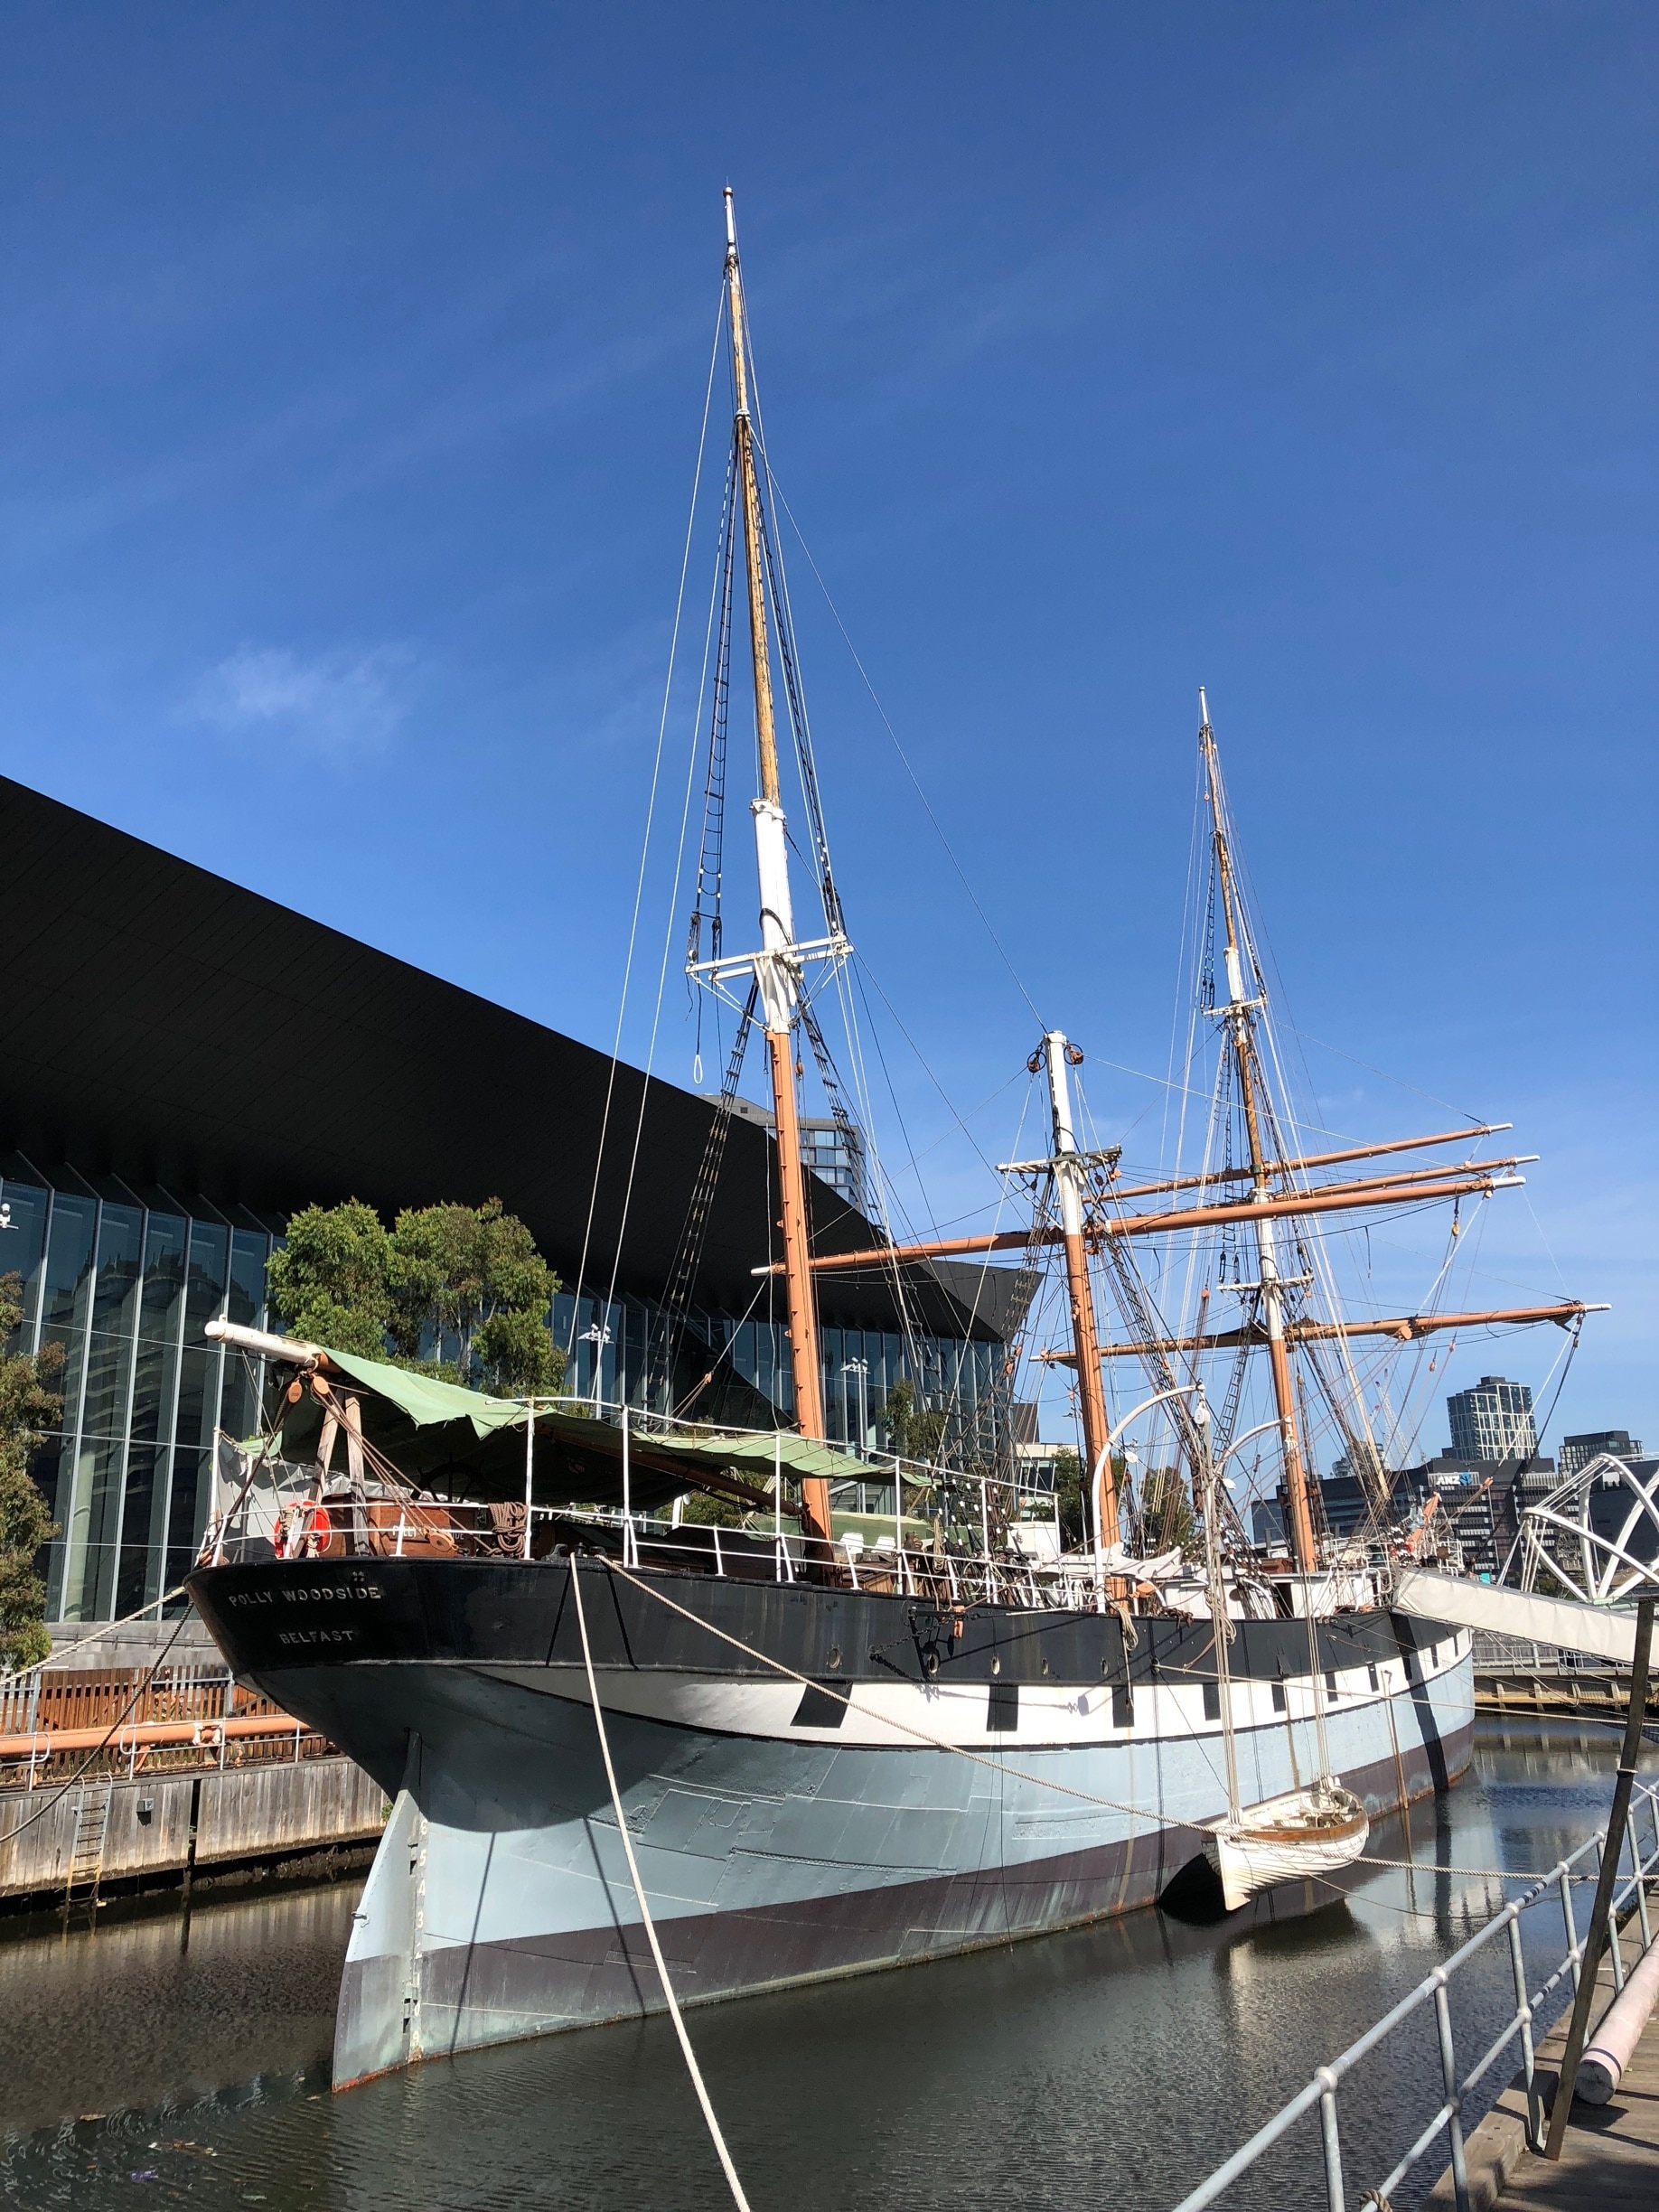 The Polly Woodside is a three masted iron hulled barque preserved in Melbourne Victoria.
Belfast built and launched in December 1885 it has sailed 1.5 million km around the globe it is now a static display in South Wharf.  Guided tours of the ship including below decks are available.